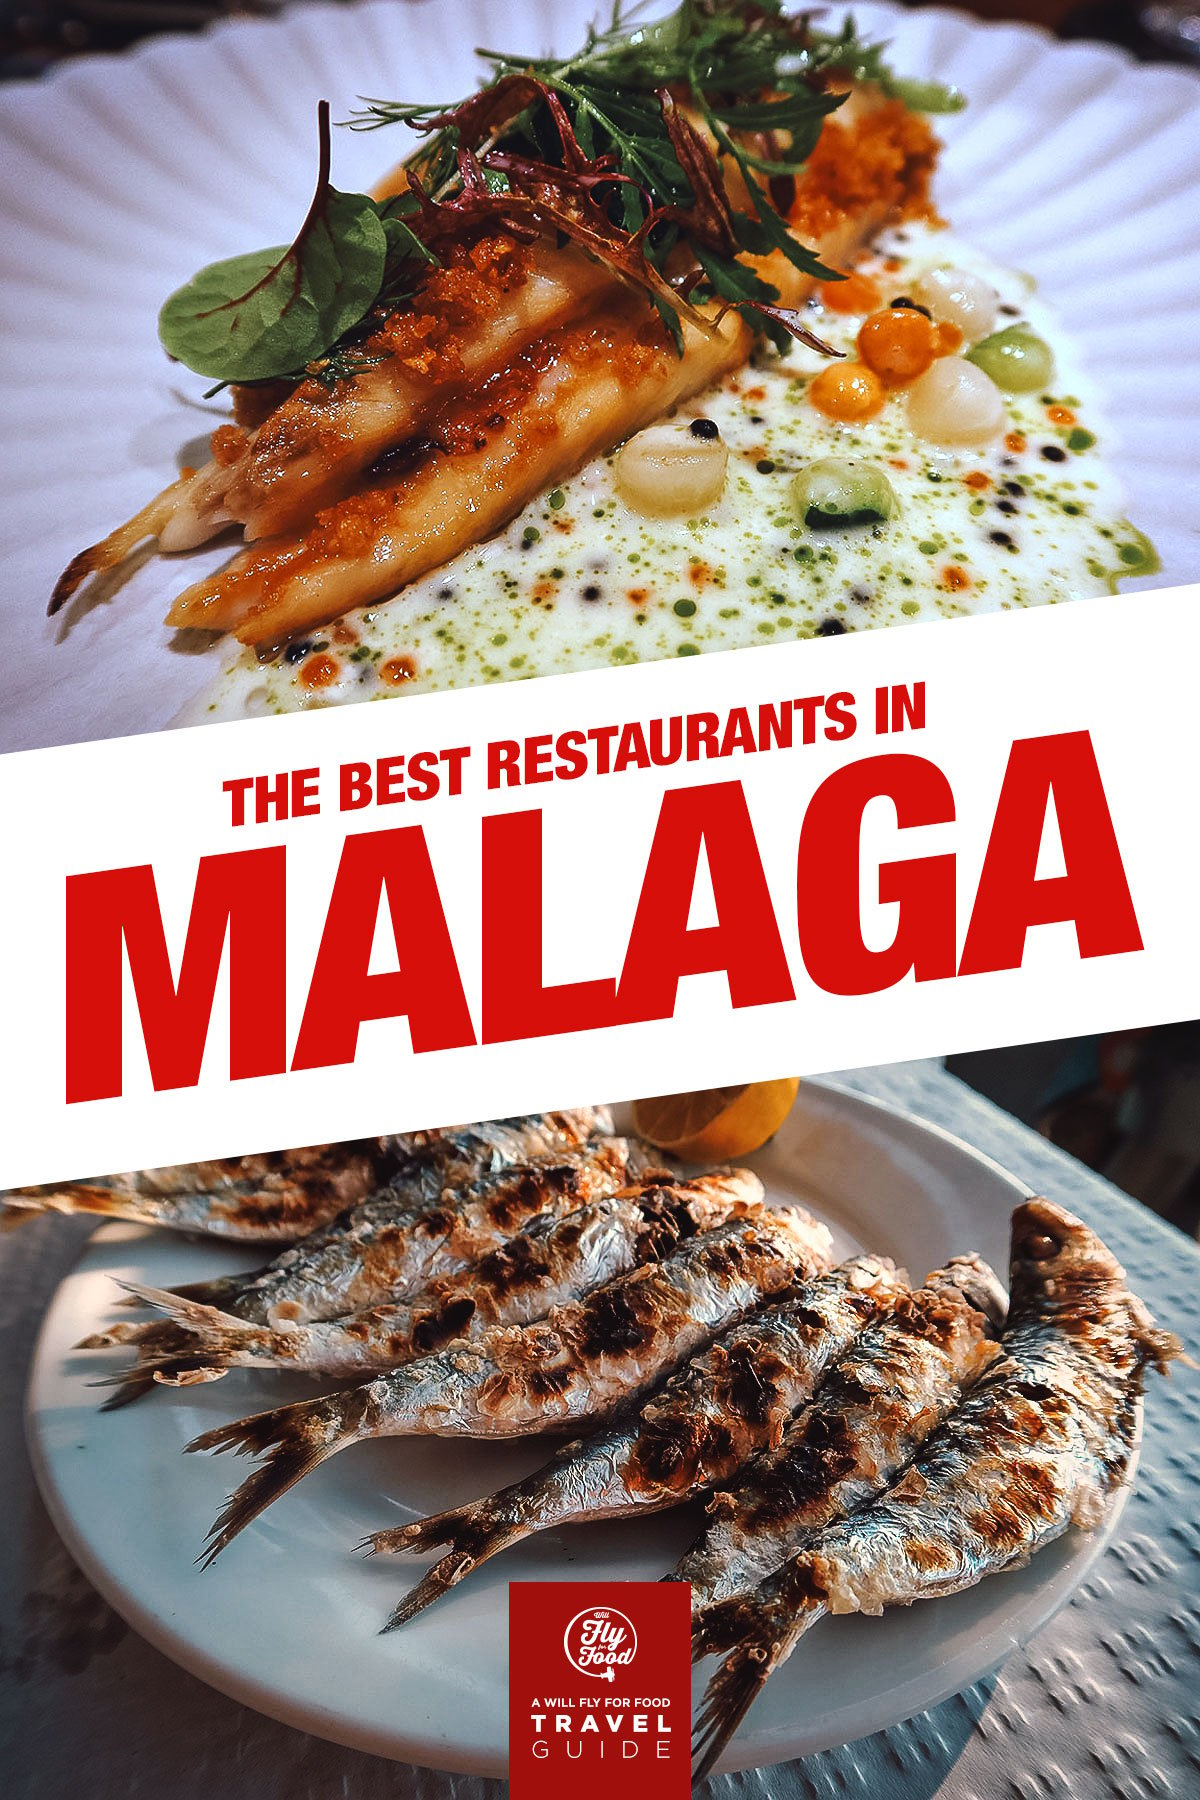 Dishes at restaurants in Malaga